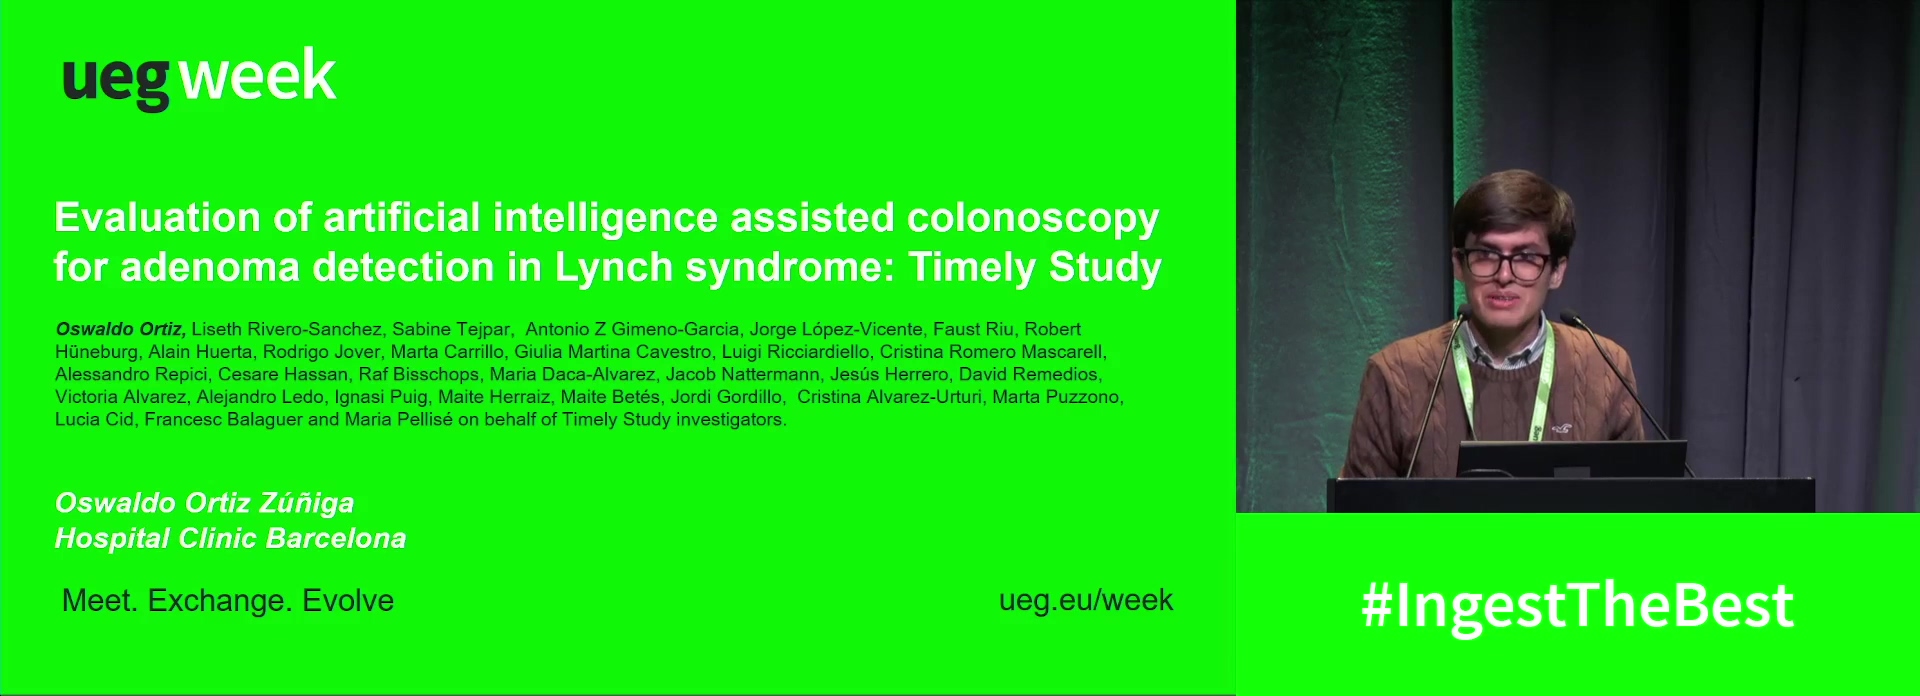 EVALUATION OF ARTIFICIAL INTELLIGENCE-ASSISTED COLONOSCOPY FOR ADENOMA DETECTION IN LYNCH SYNDROME: A MULTICENTRE RANDOMIZED CONTROLLED TRIAL (TIMELY STUDY)